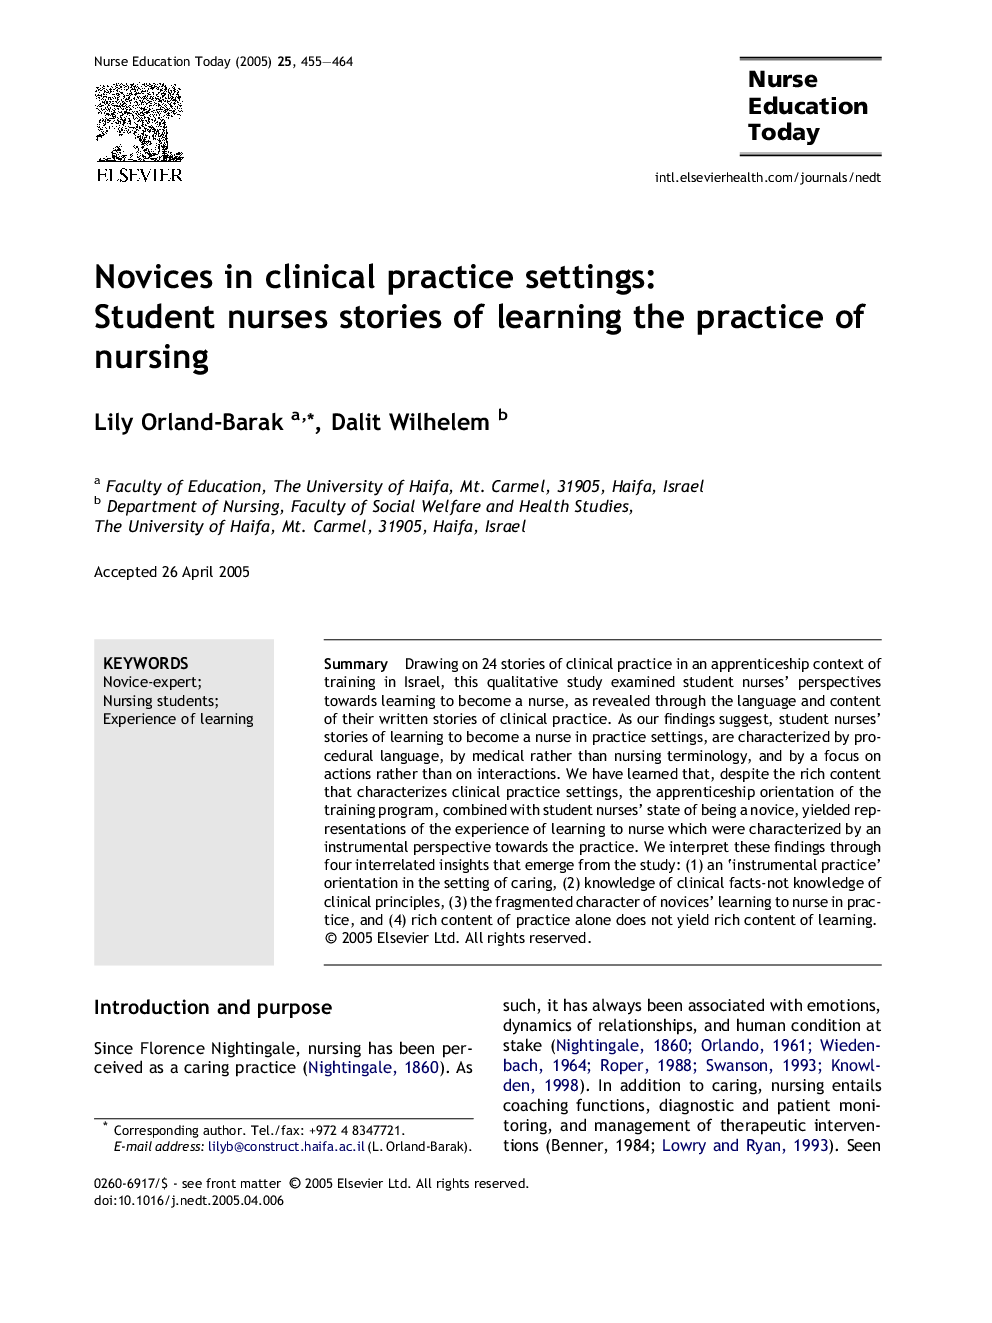 Novices in clinical practice settings: Student nurses stories of learning the practice of nursing